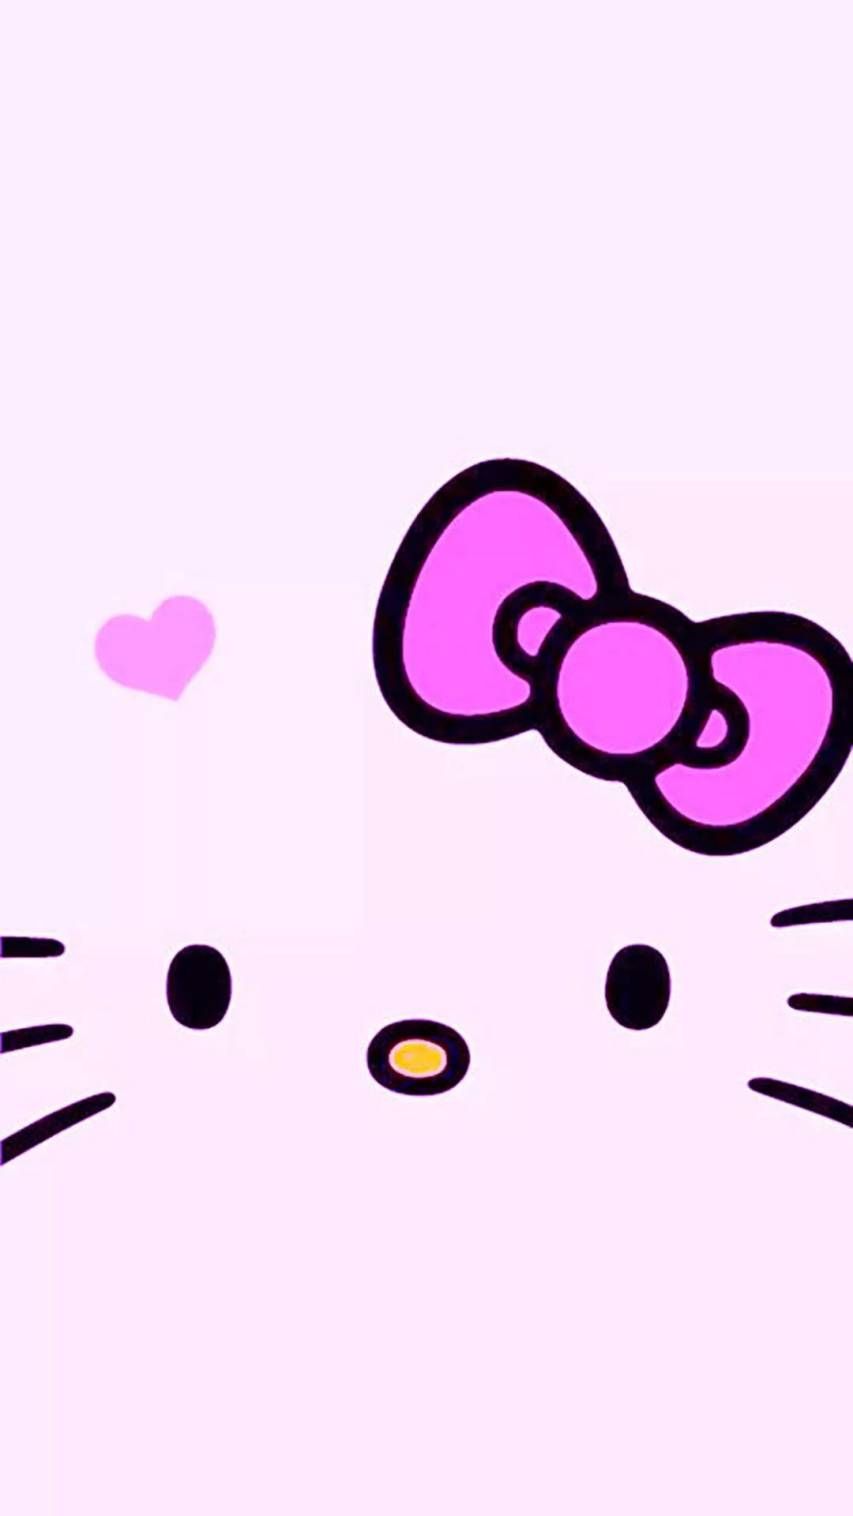 A hello kitty with pink bow and hearts - Hello Kitty, Sanrio